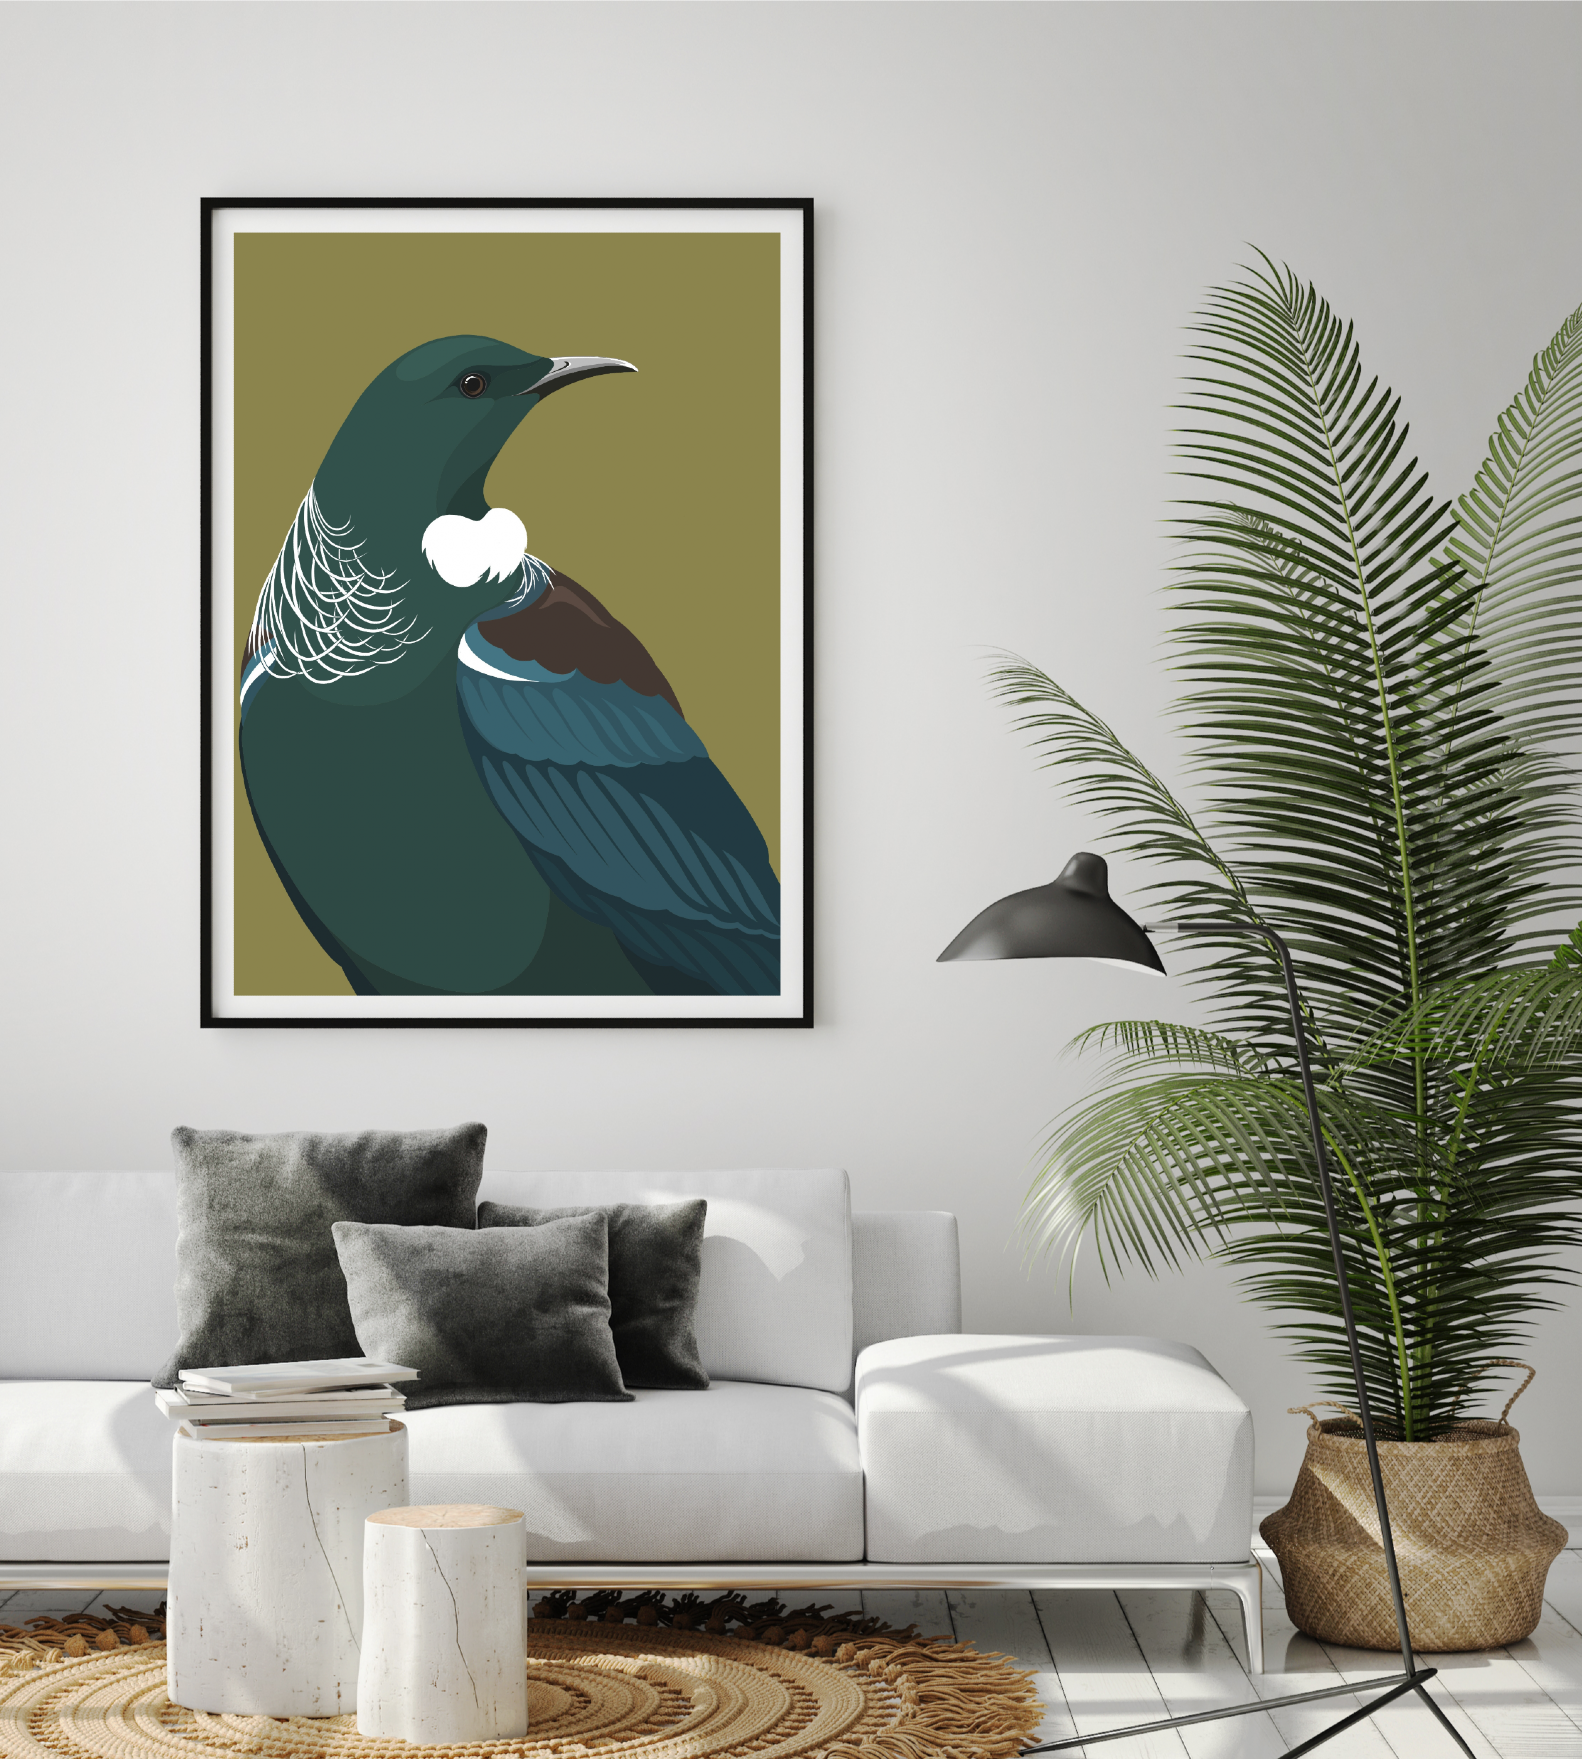 Framed Tui art print, by Hansby Design New Zealand artist